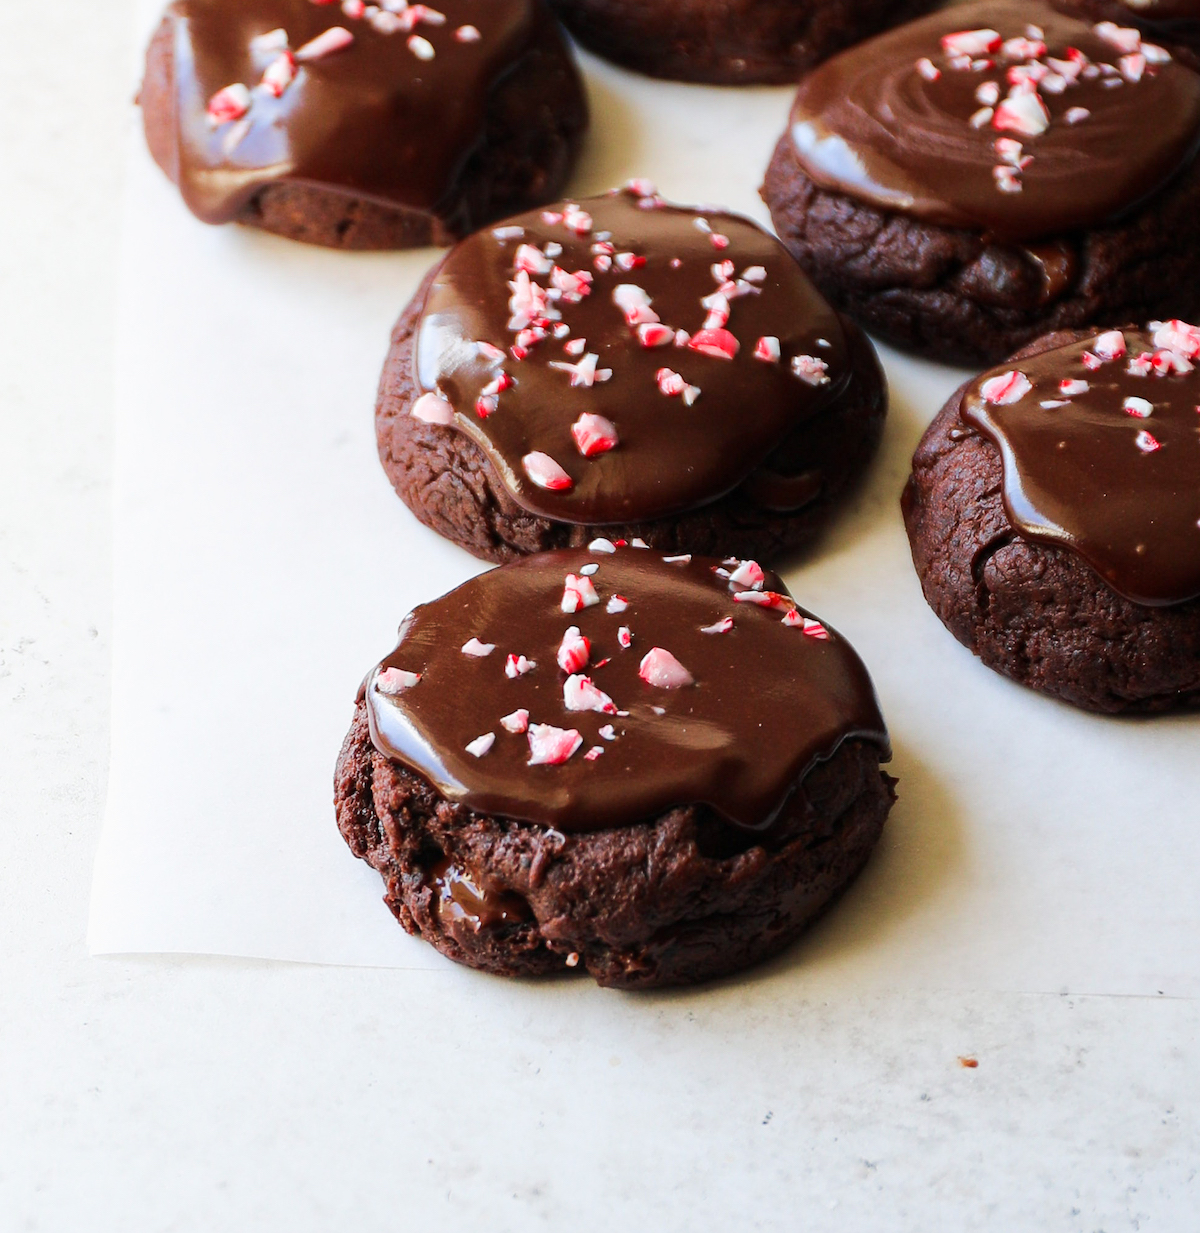 A close up side angle of chocolate cookies with frosting and candy canes.